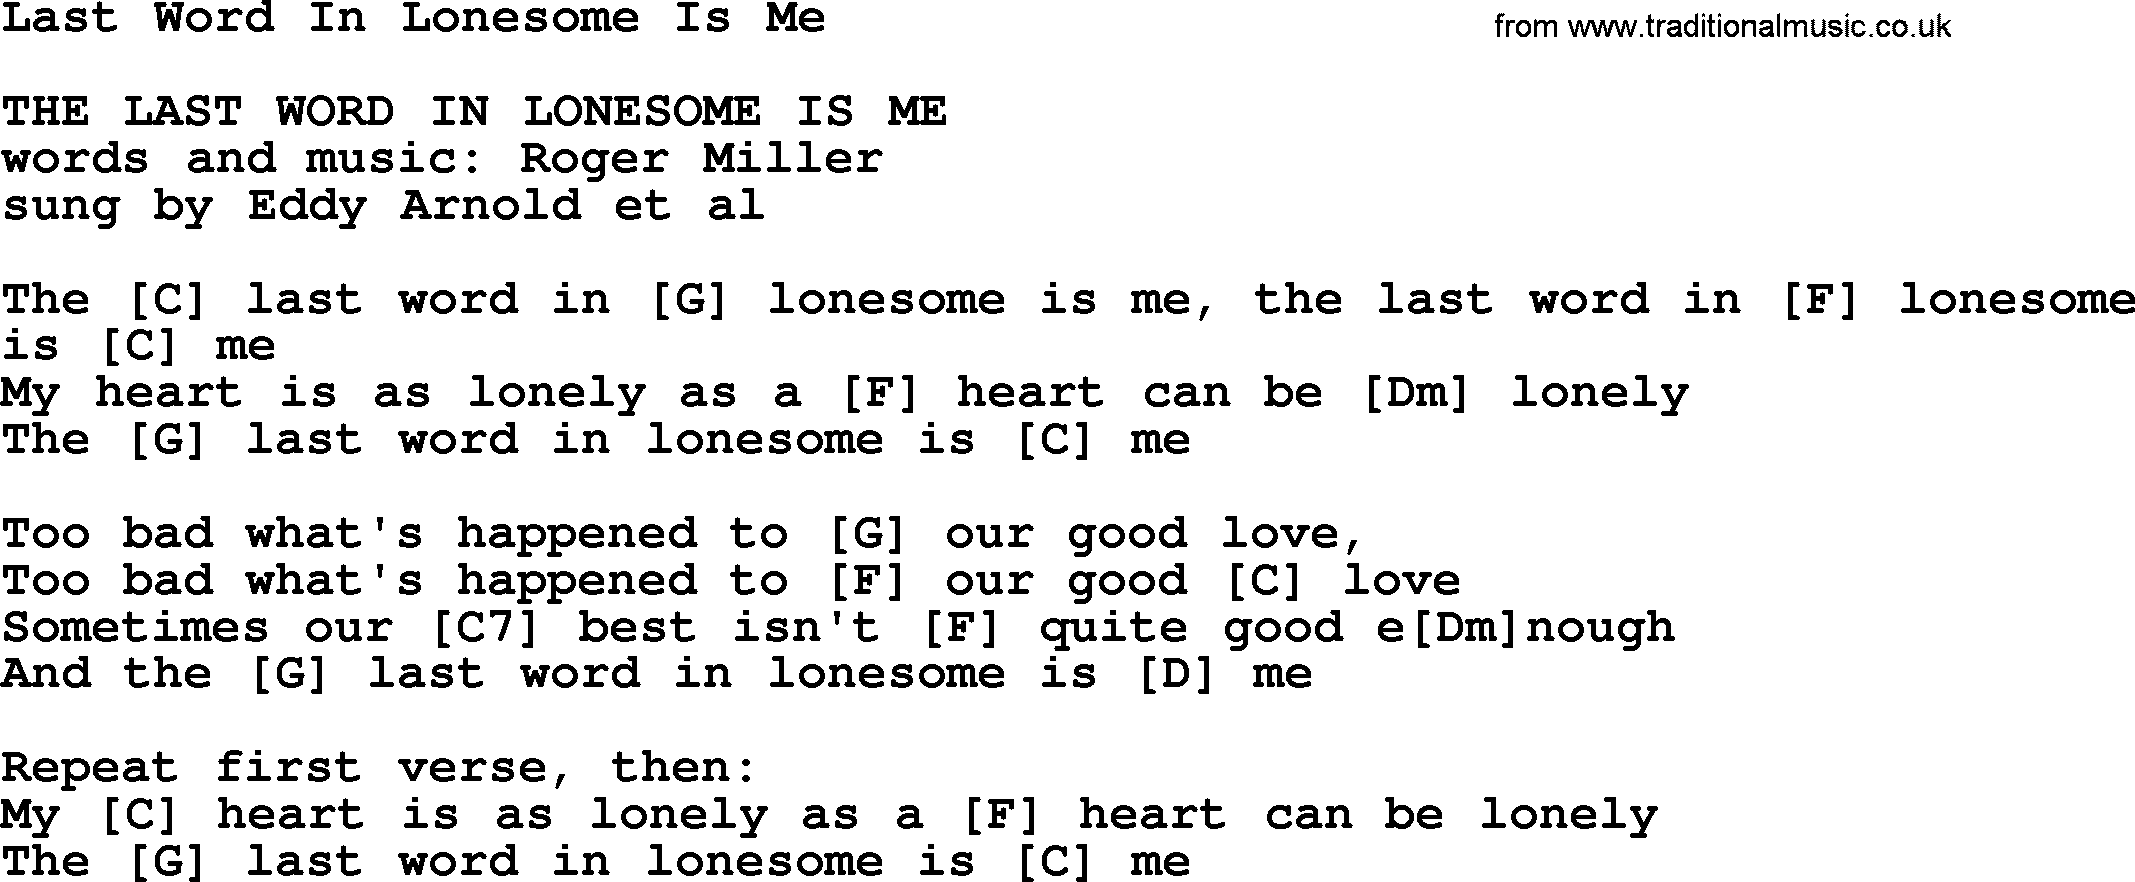 Bluegrass song: Last Word In Lonesome Is Me, lyrics and chords